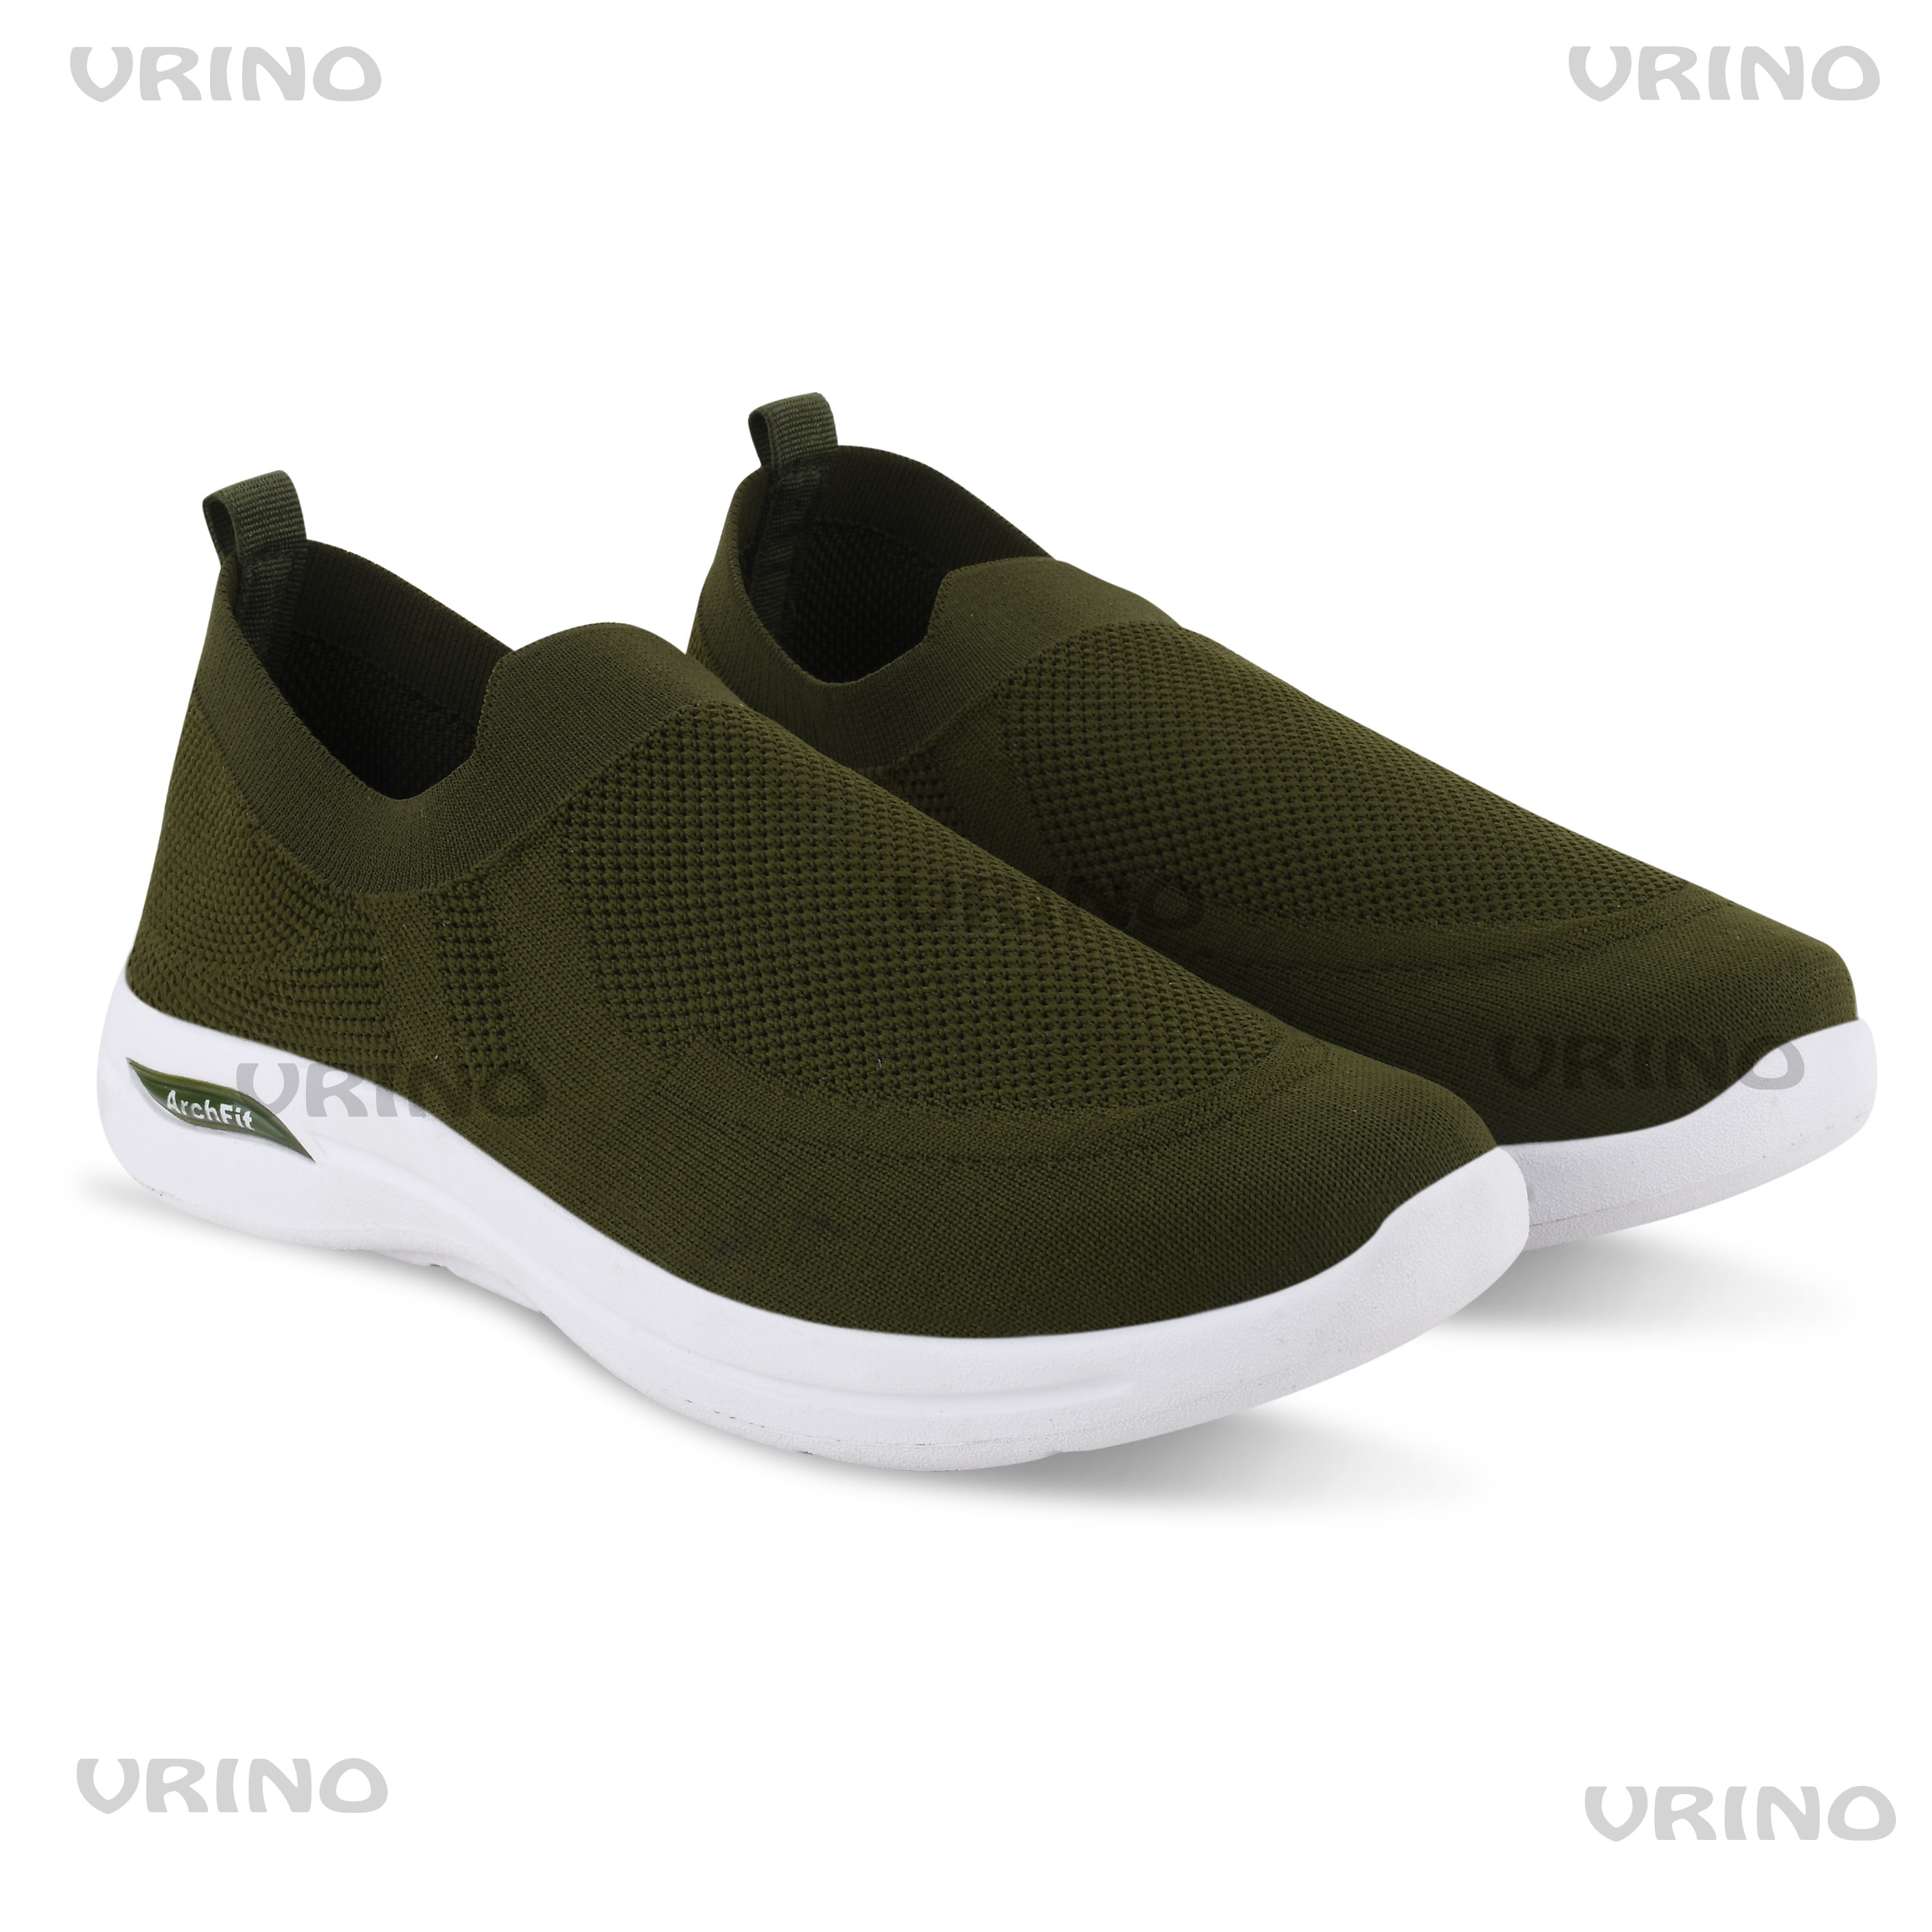 Men's Green Knitted Casual Slip-on Shoes